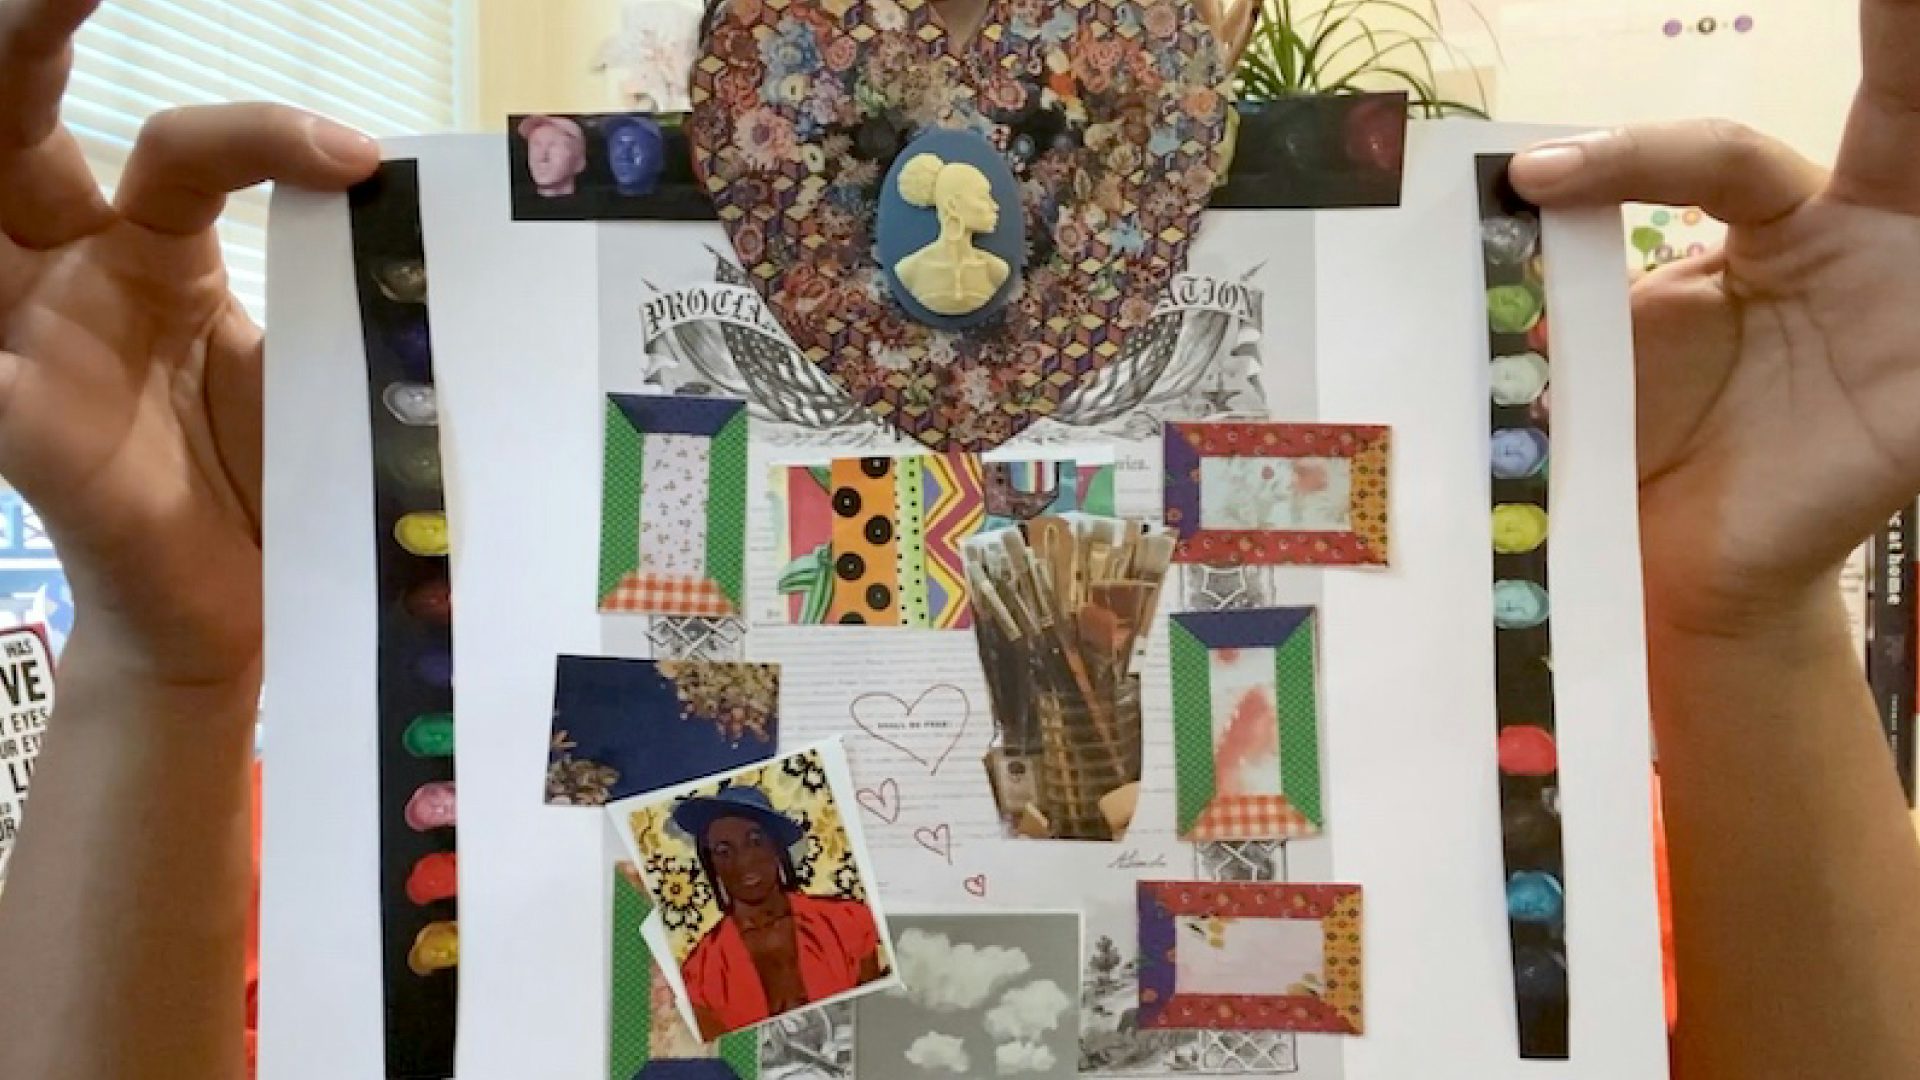 Artistic, colorful collage featuring quilt patterns, a photo of paintbrushes, writing, clouds, among other images.